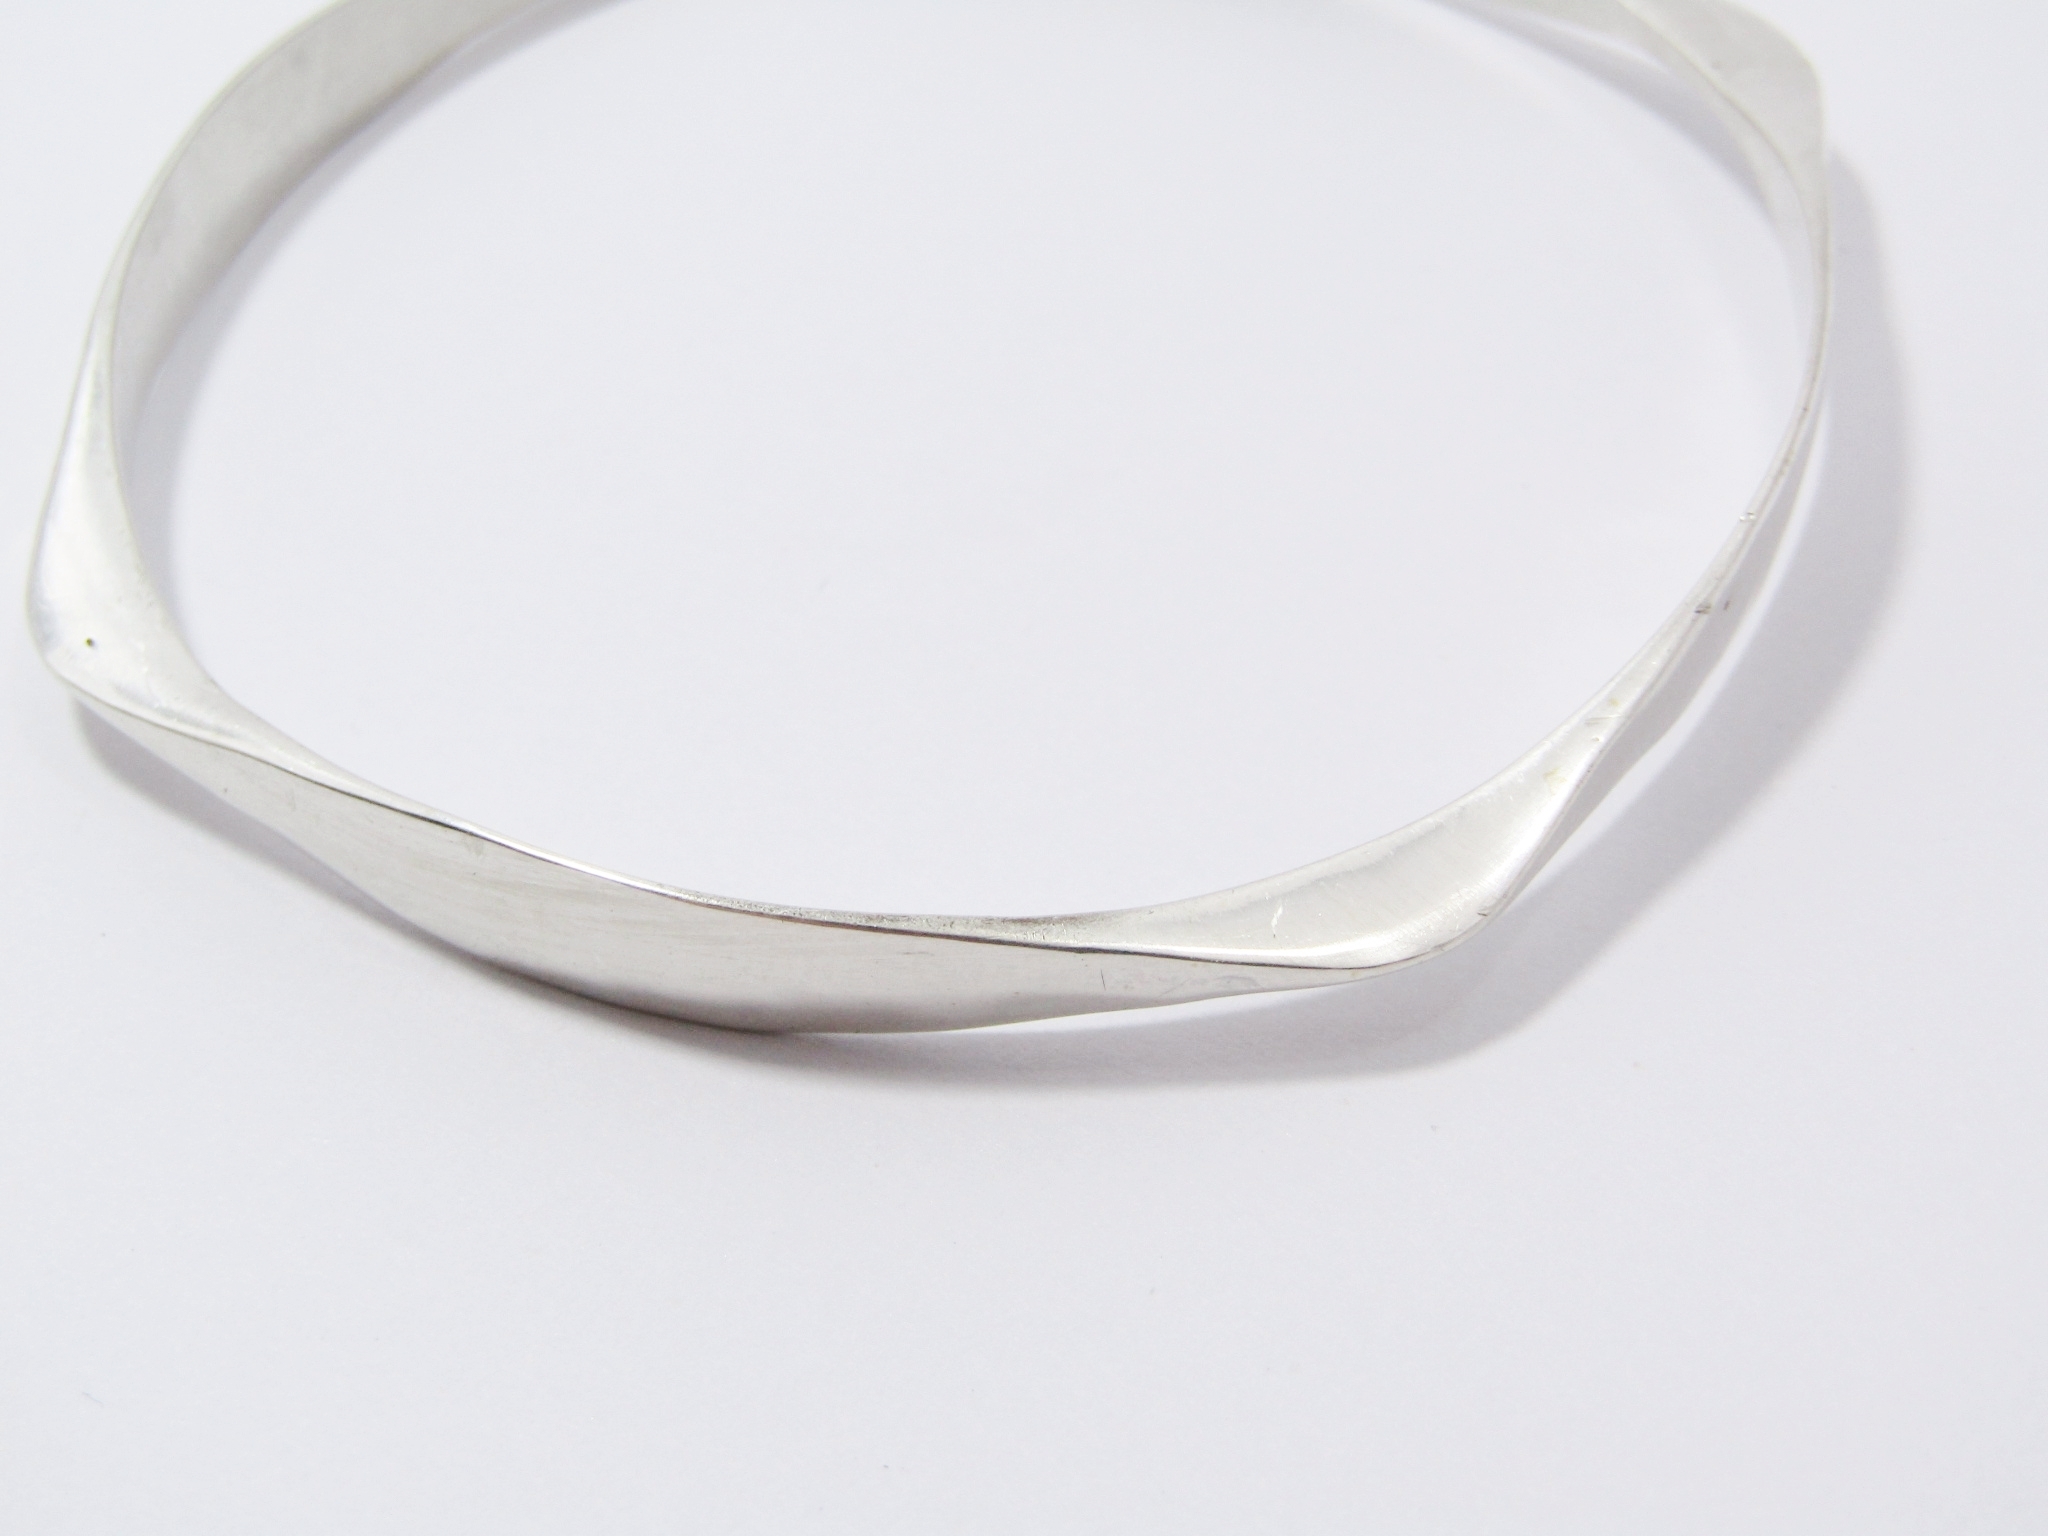 A Lovely Fancy Hammered Design Square Bangle in Sterling Silver.